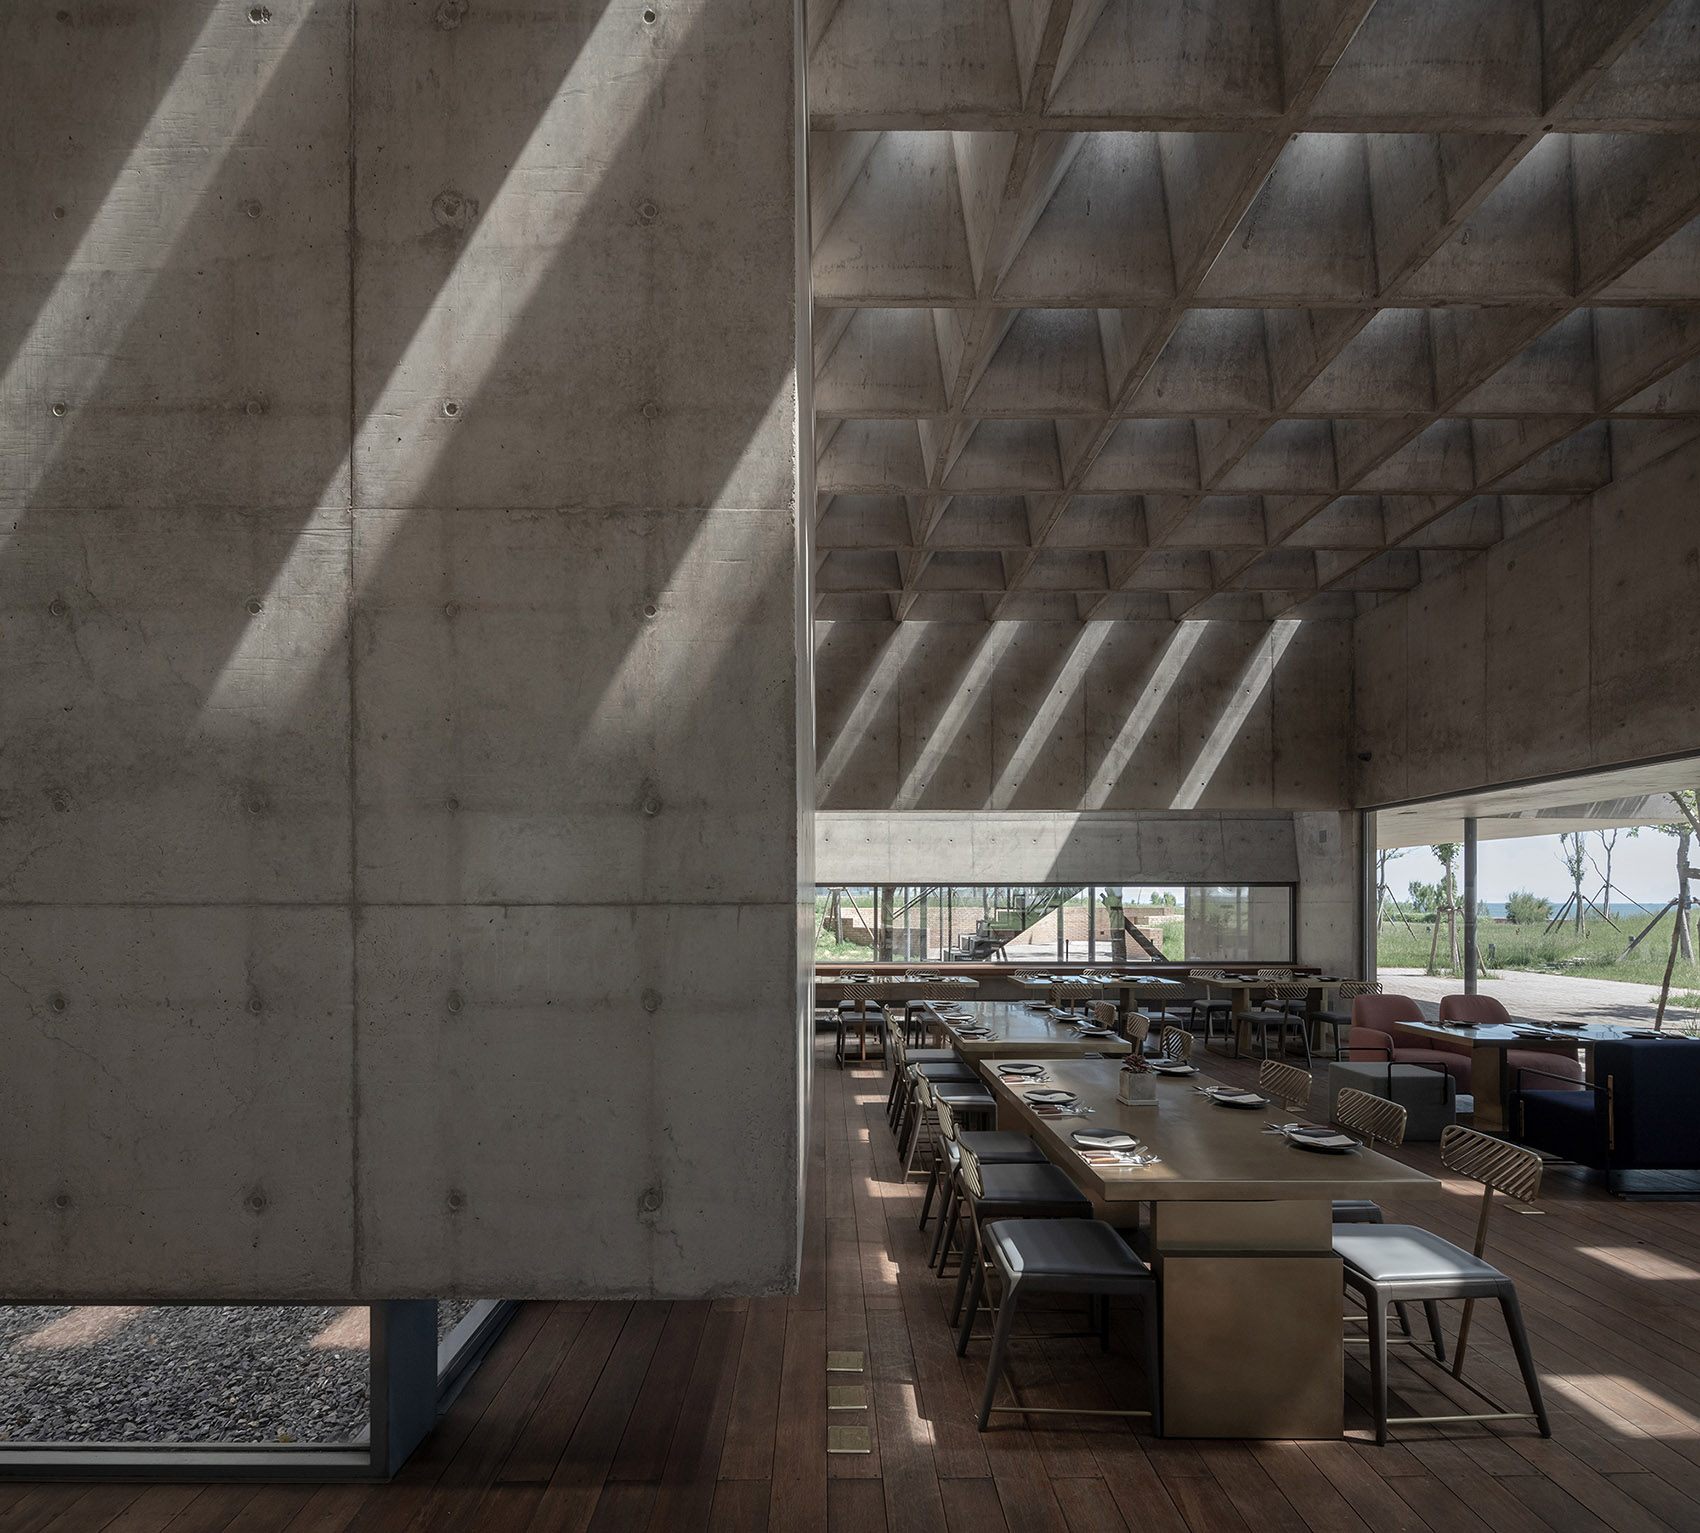 013-restaurant-y-sea-china-by-vector-architects.jpg